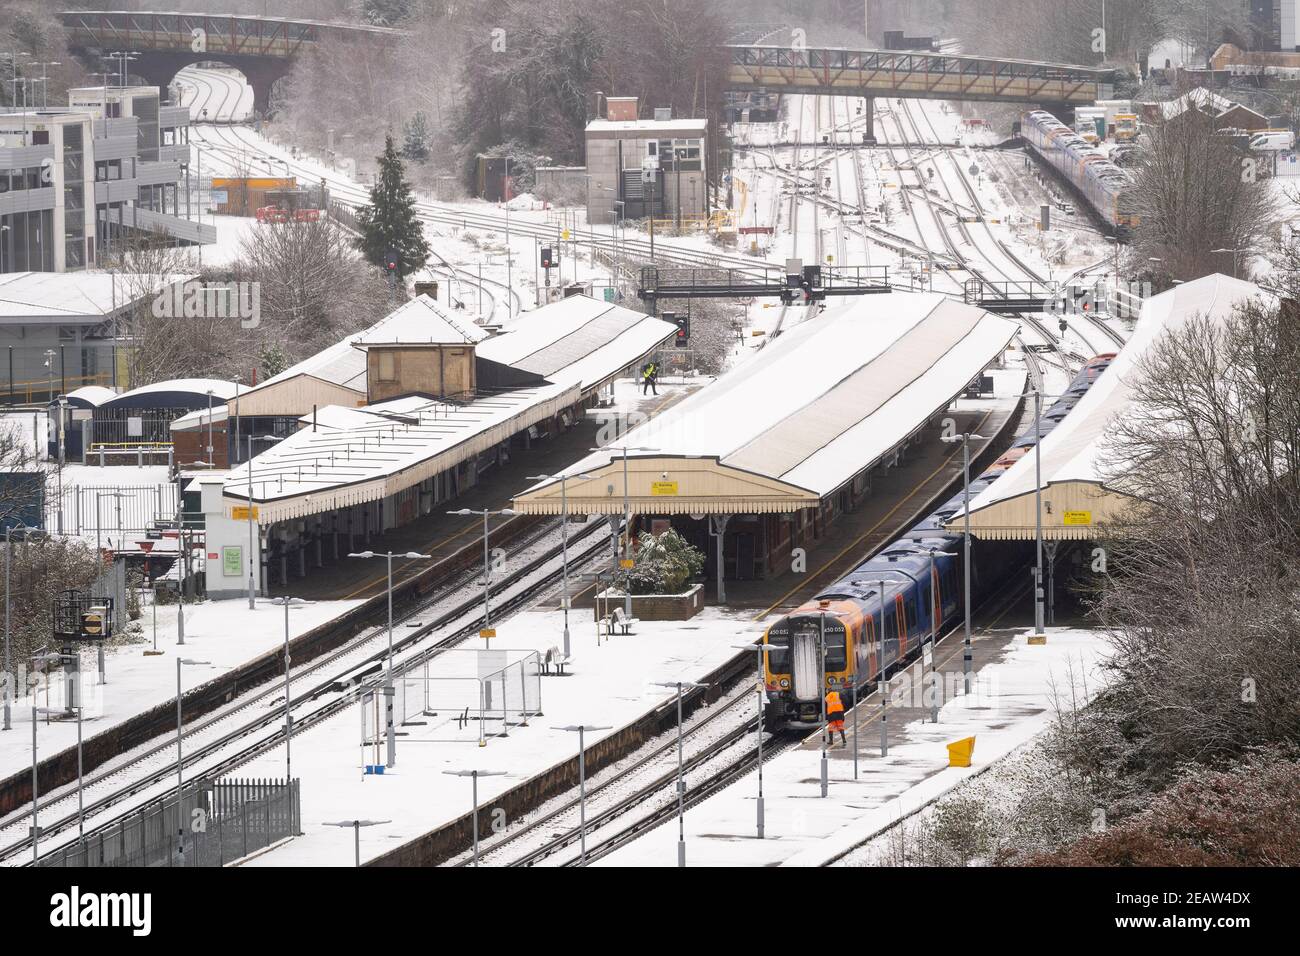 A railway worker clearing snow from a platform next to a South Western Railway train at Basingstoke railway station during January snowfall, 2021, UK Stock Photo